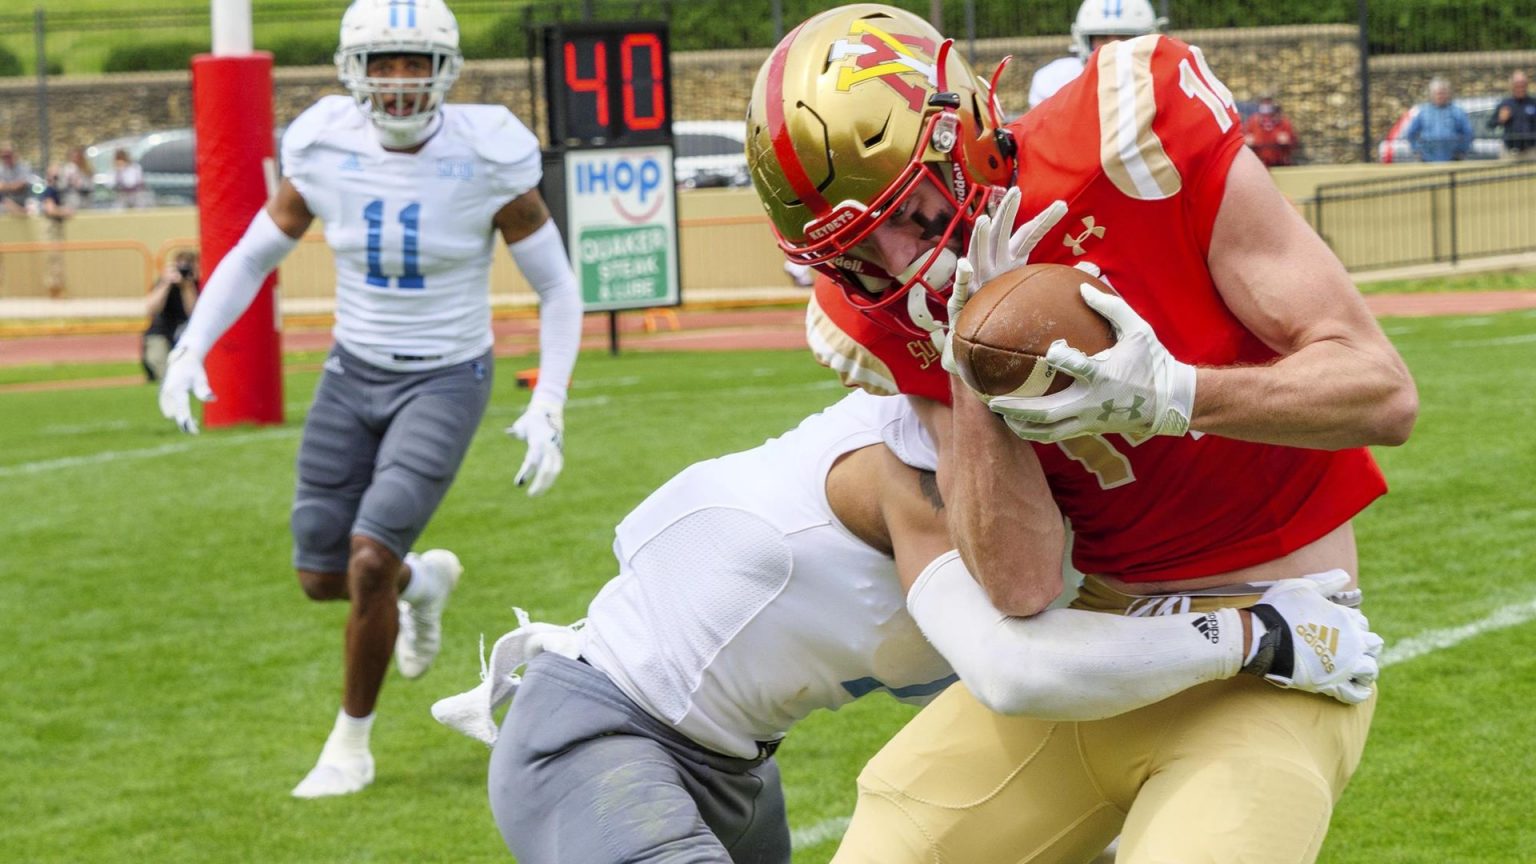 2021 Fcs Season Preview Vmi The College Sports Journal 9280